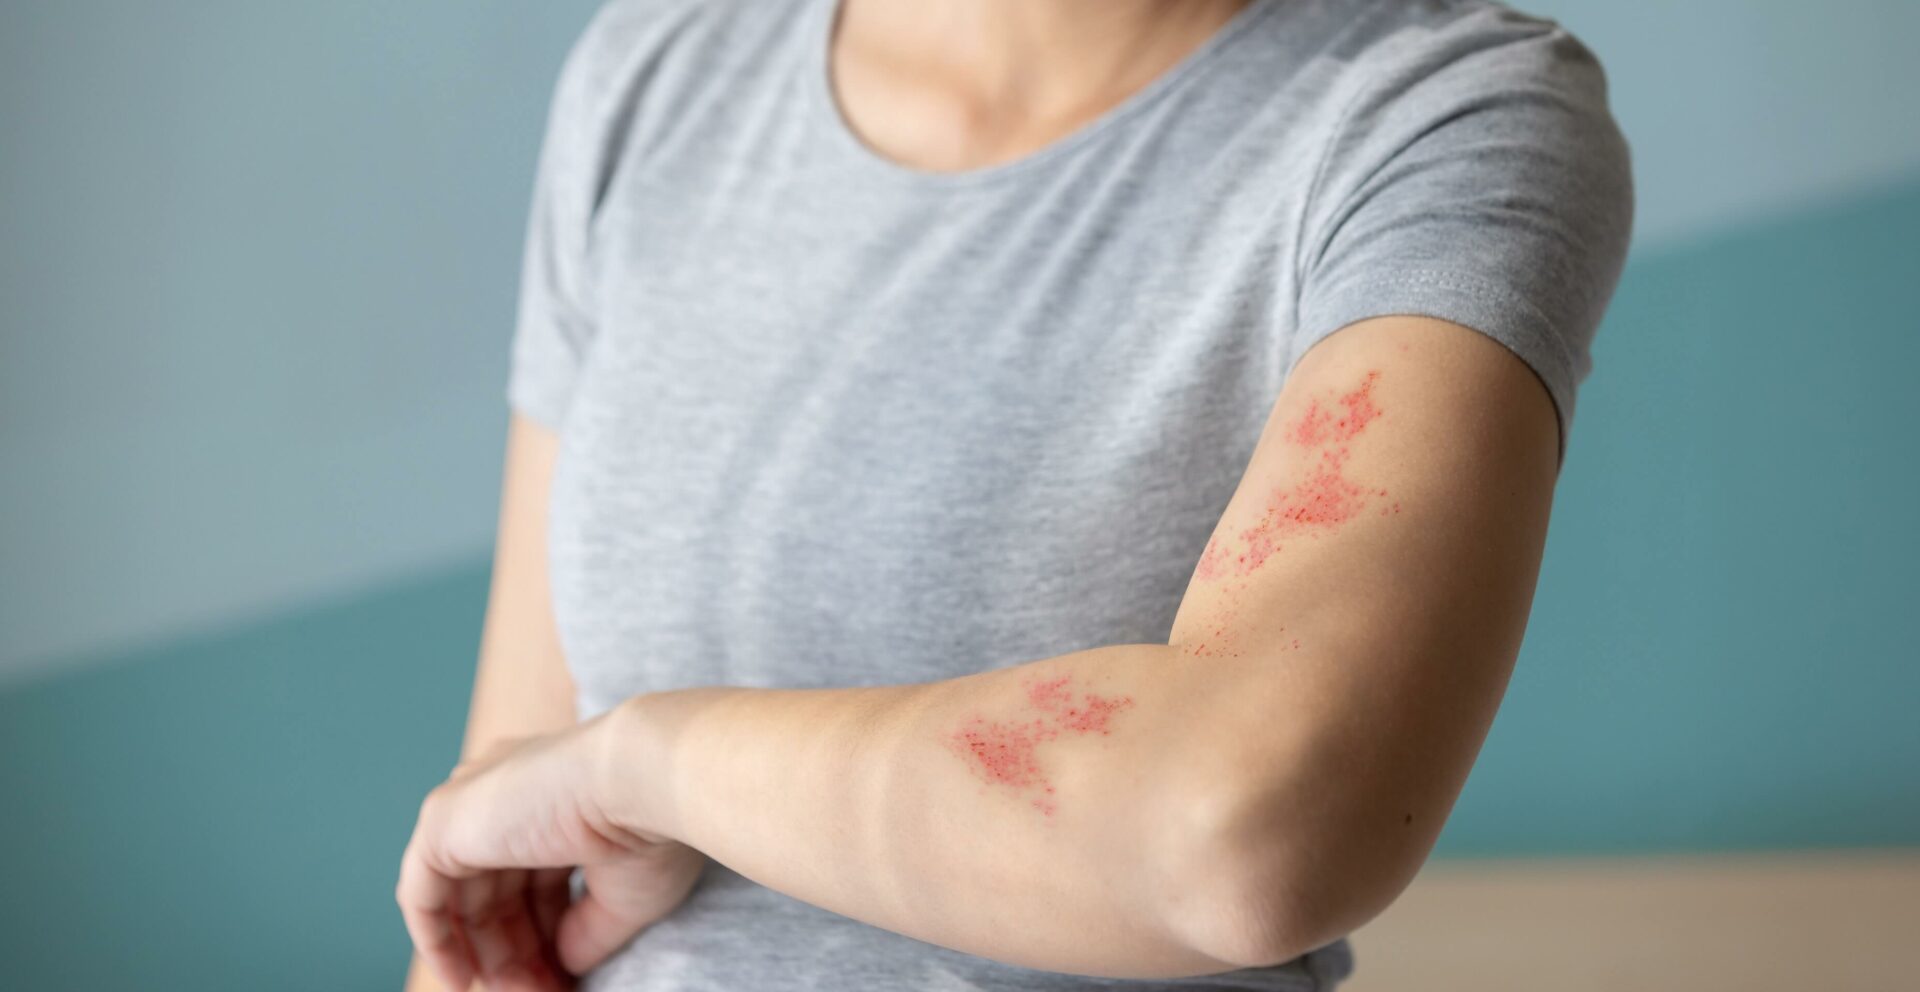 Woman examines her rash on her arm